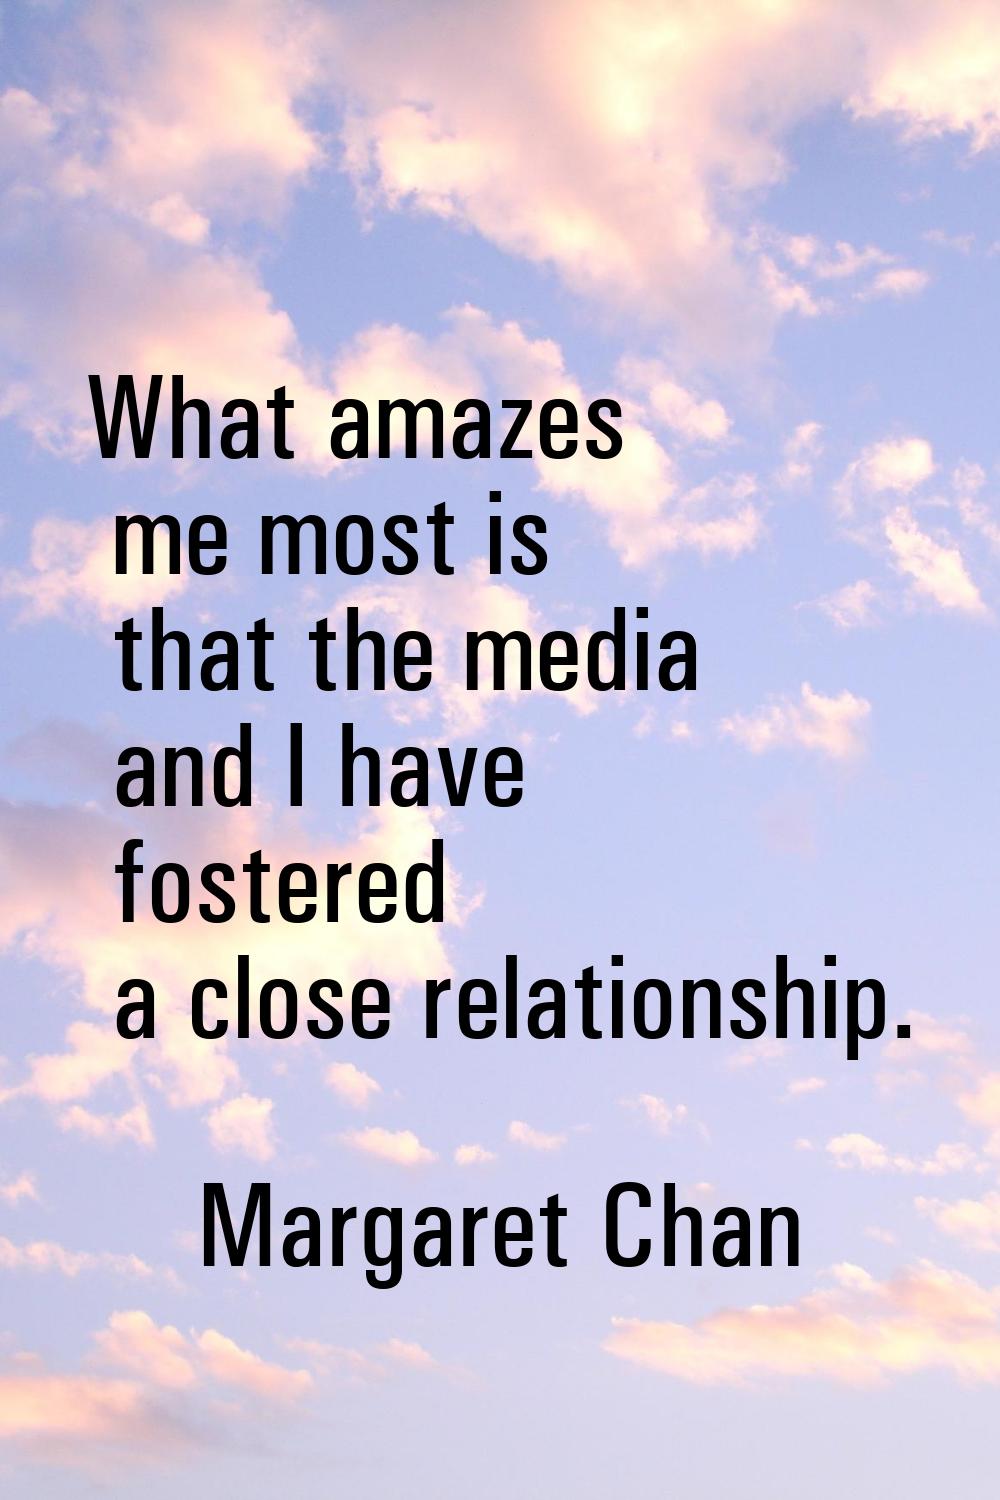 What amazes me most is that the media and I have fostered a close relationship.